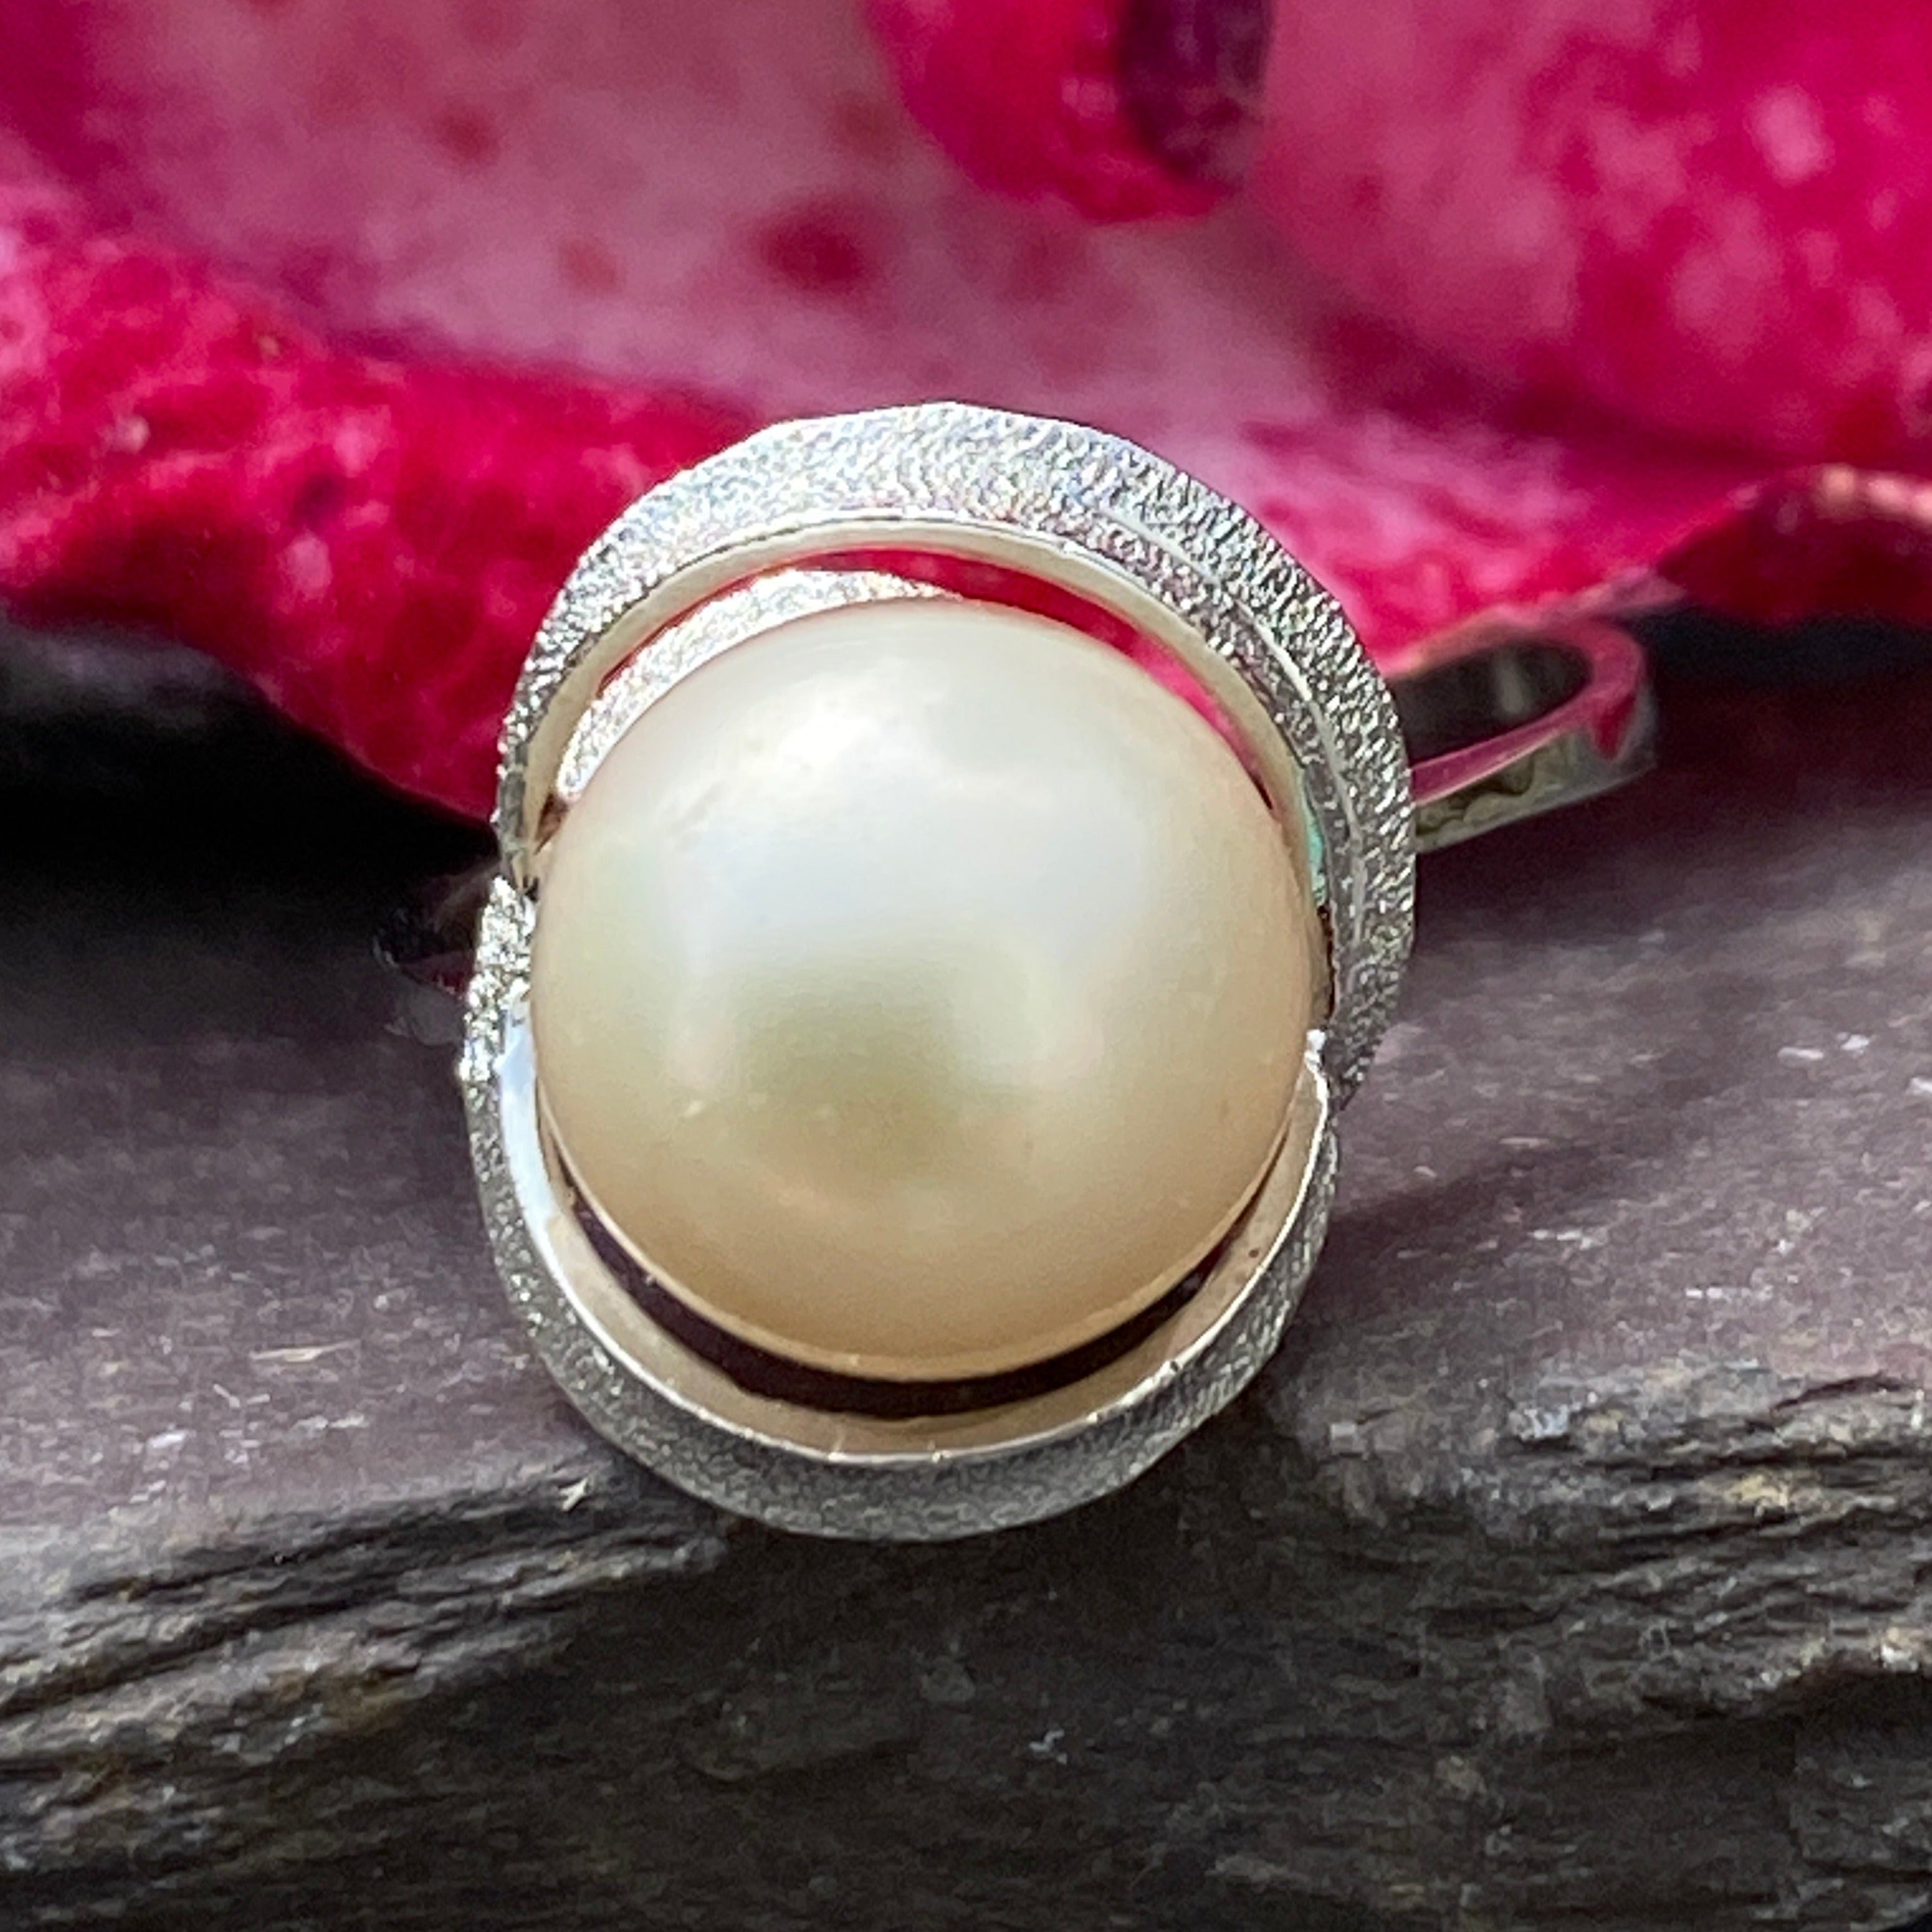 LN Vintage Faux Pearl Cocktail Ring.